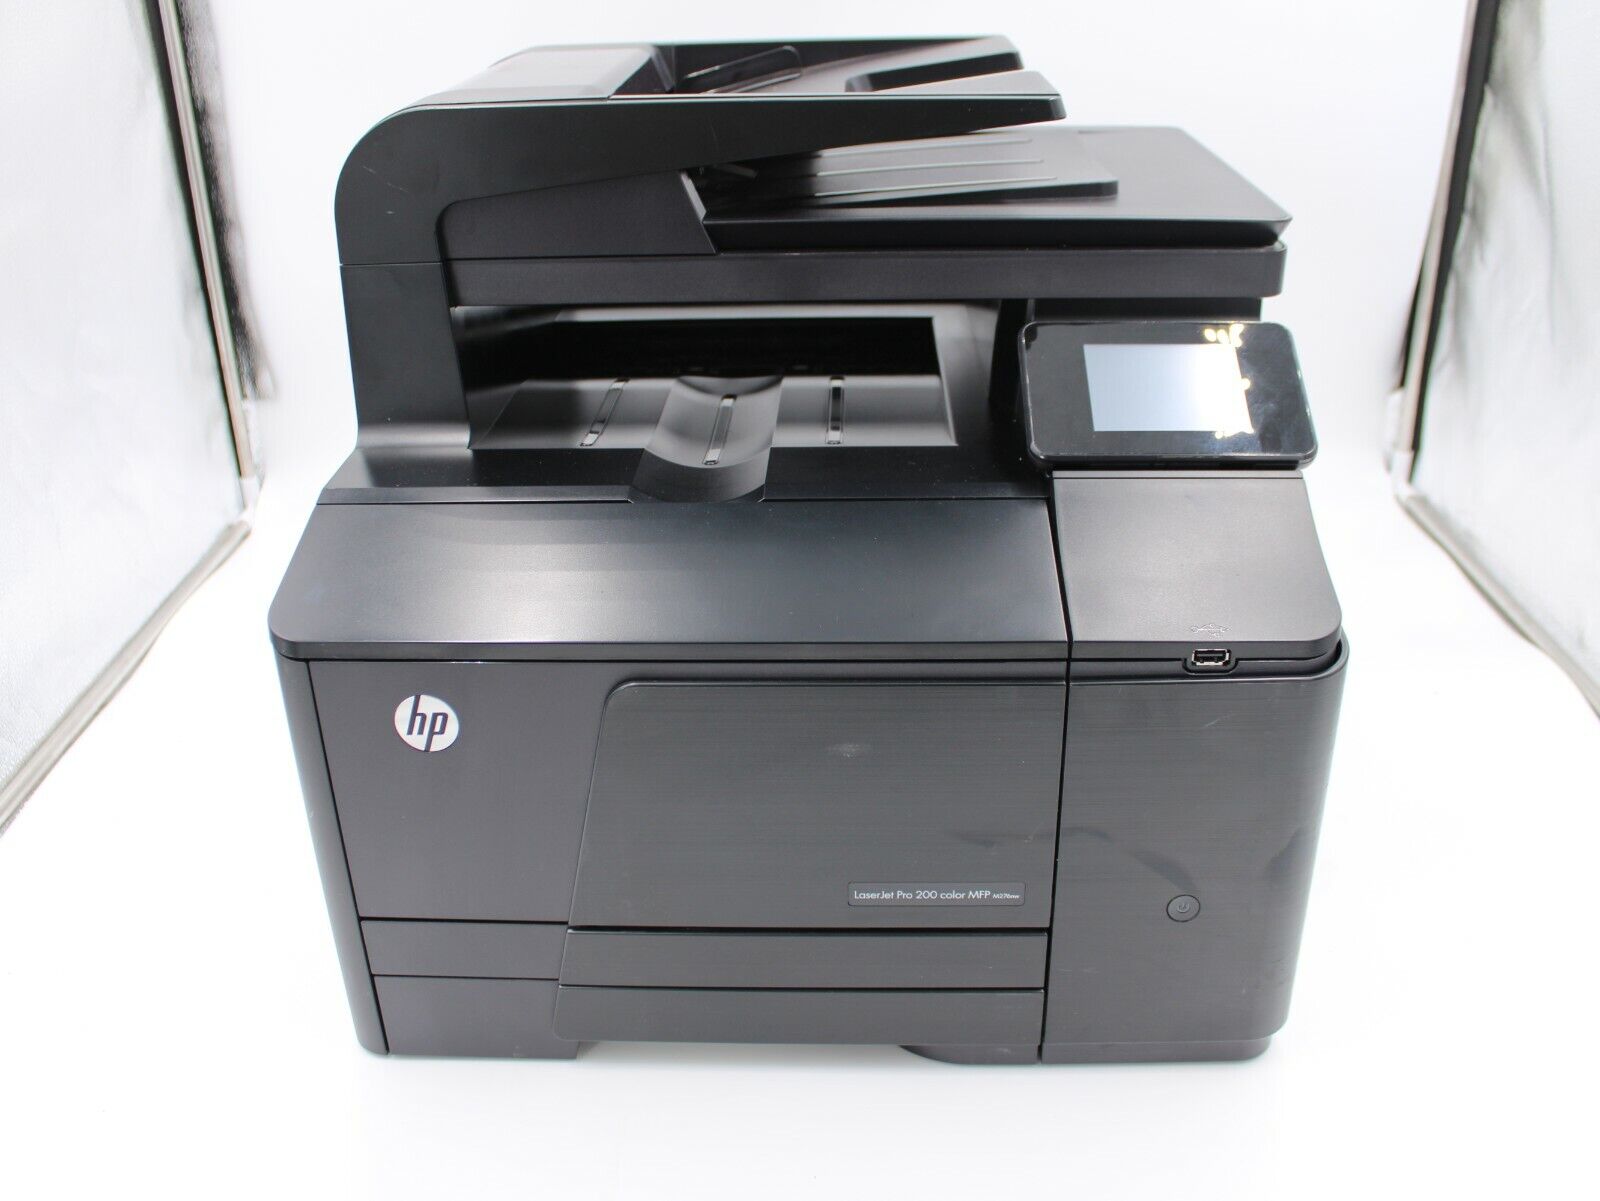 HP LaserJet Pro 200 Color MFP M276nw All in One Color Printer With Toner TESTED